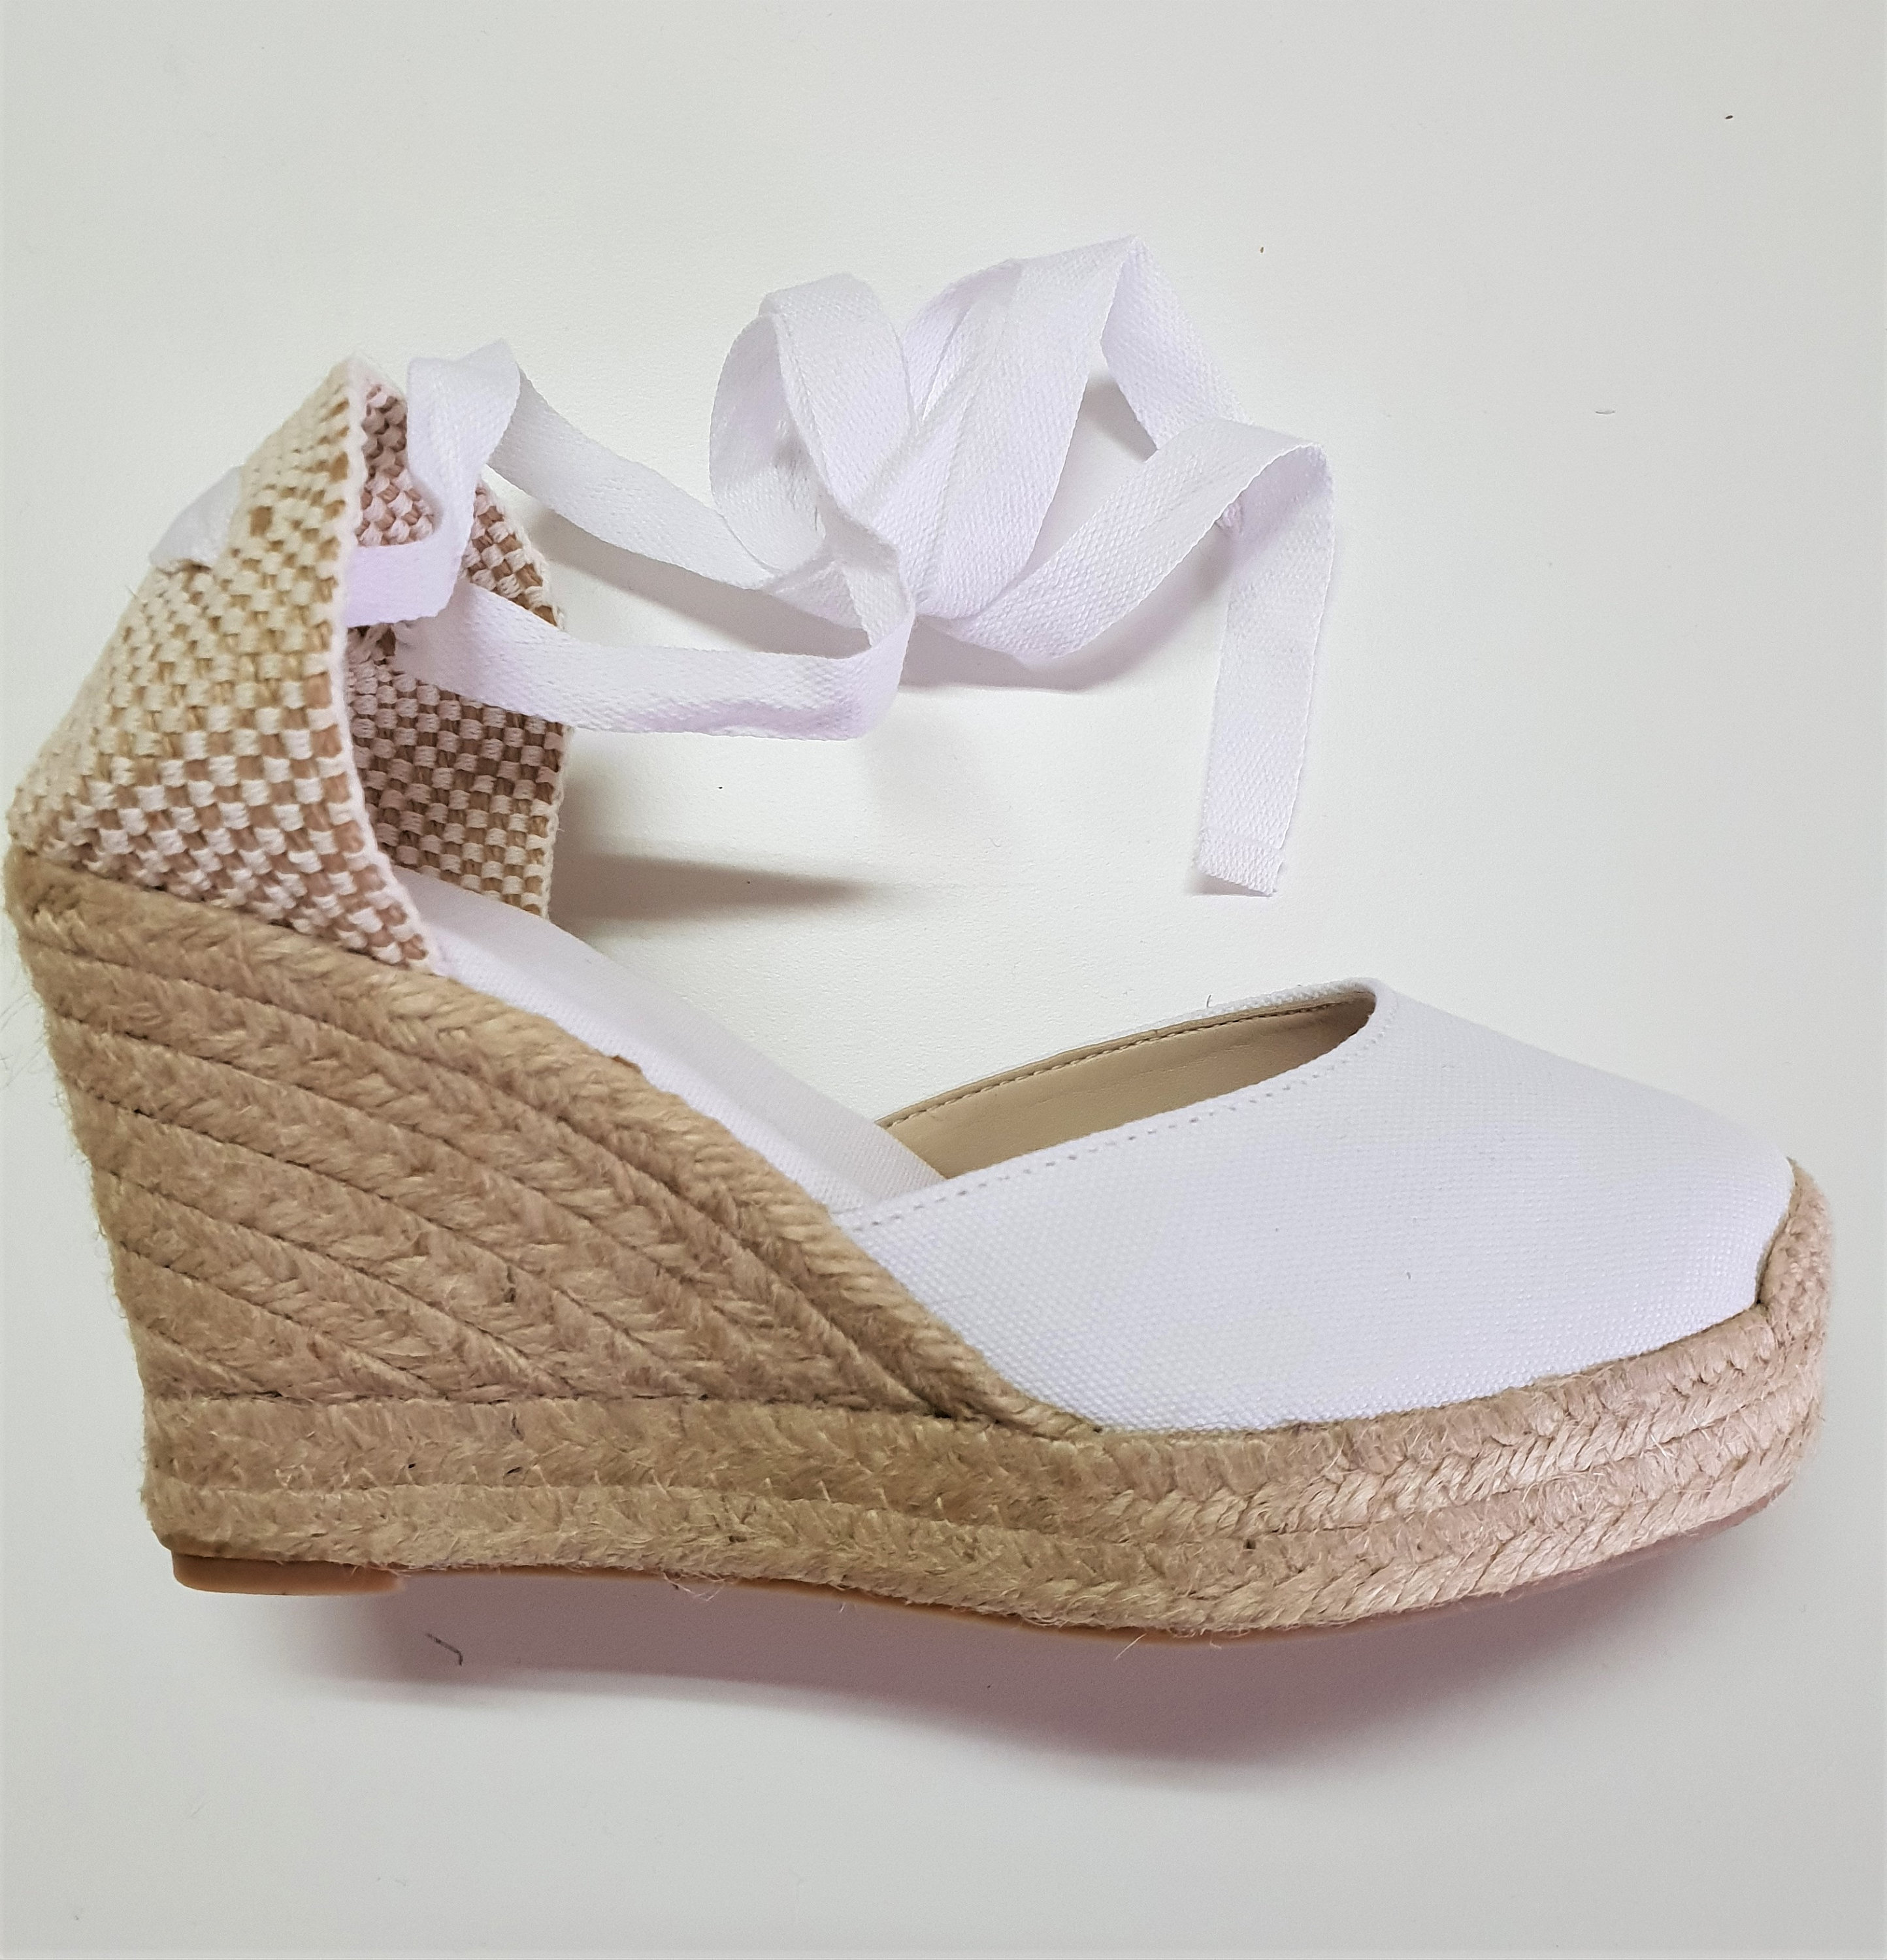 Lace up Espadrille PLATFORM Wedges - BRIDES COLLECTION- Made In Spain ...